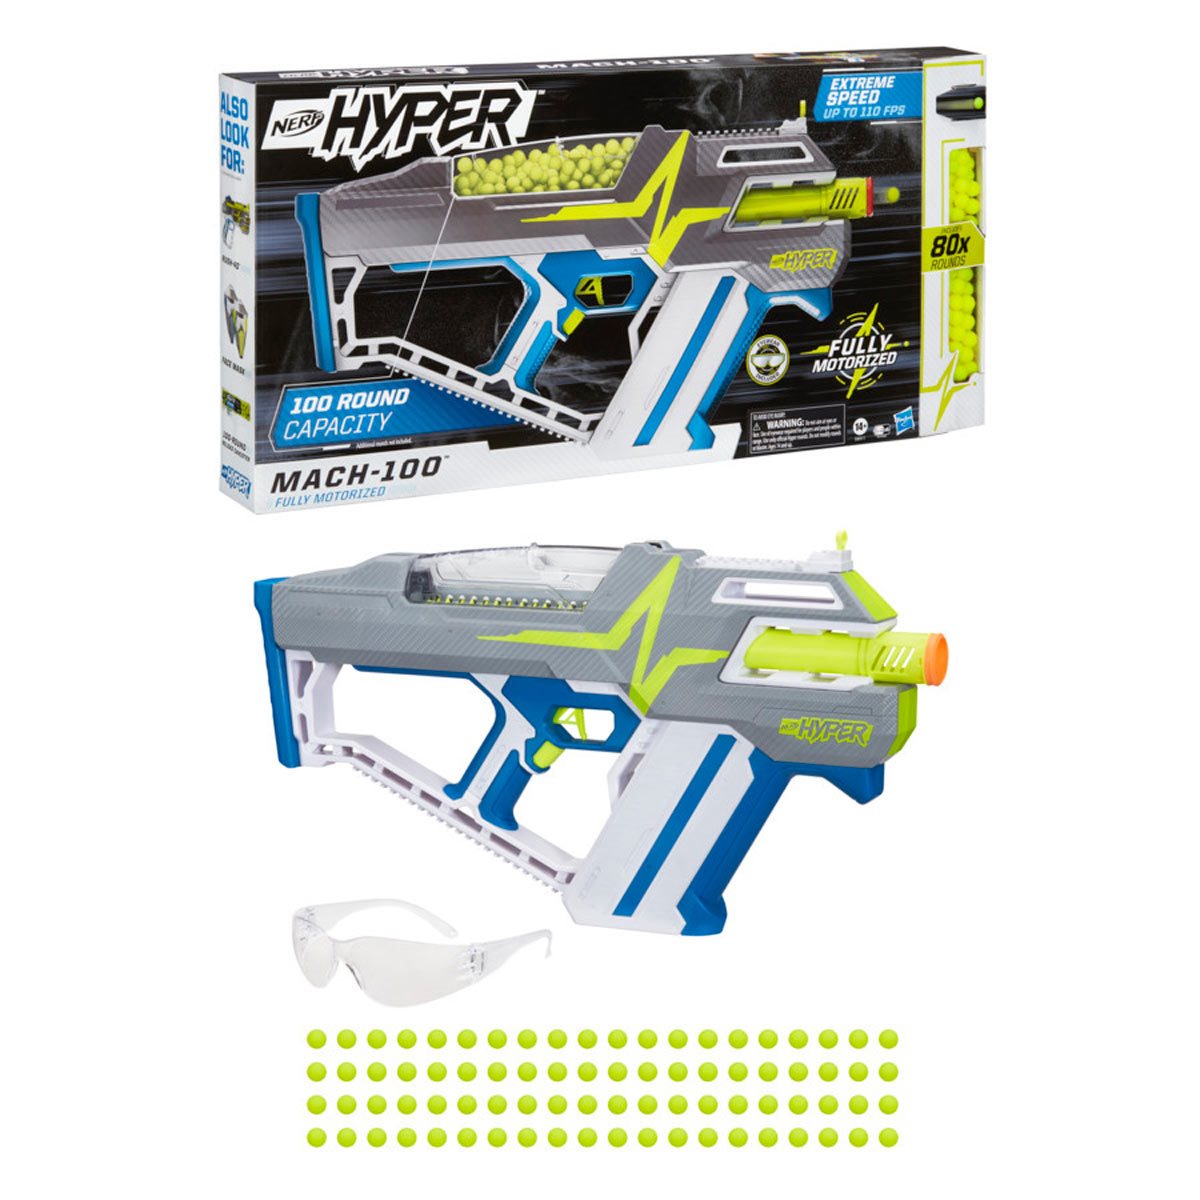 Nerf Hyper Series  A Brief Introduction 